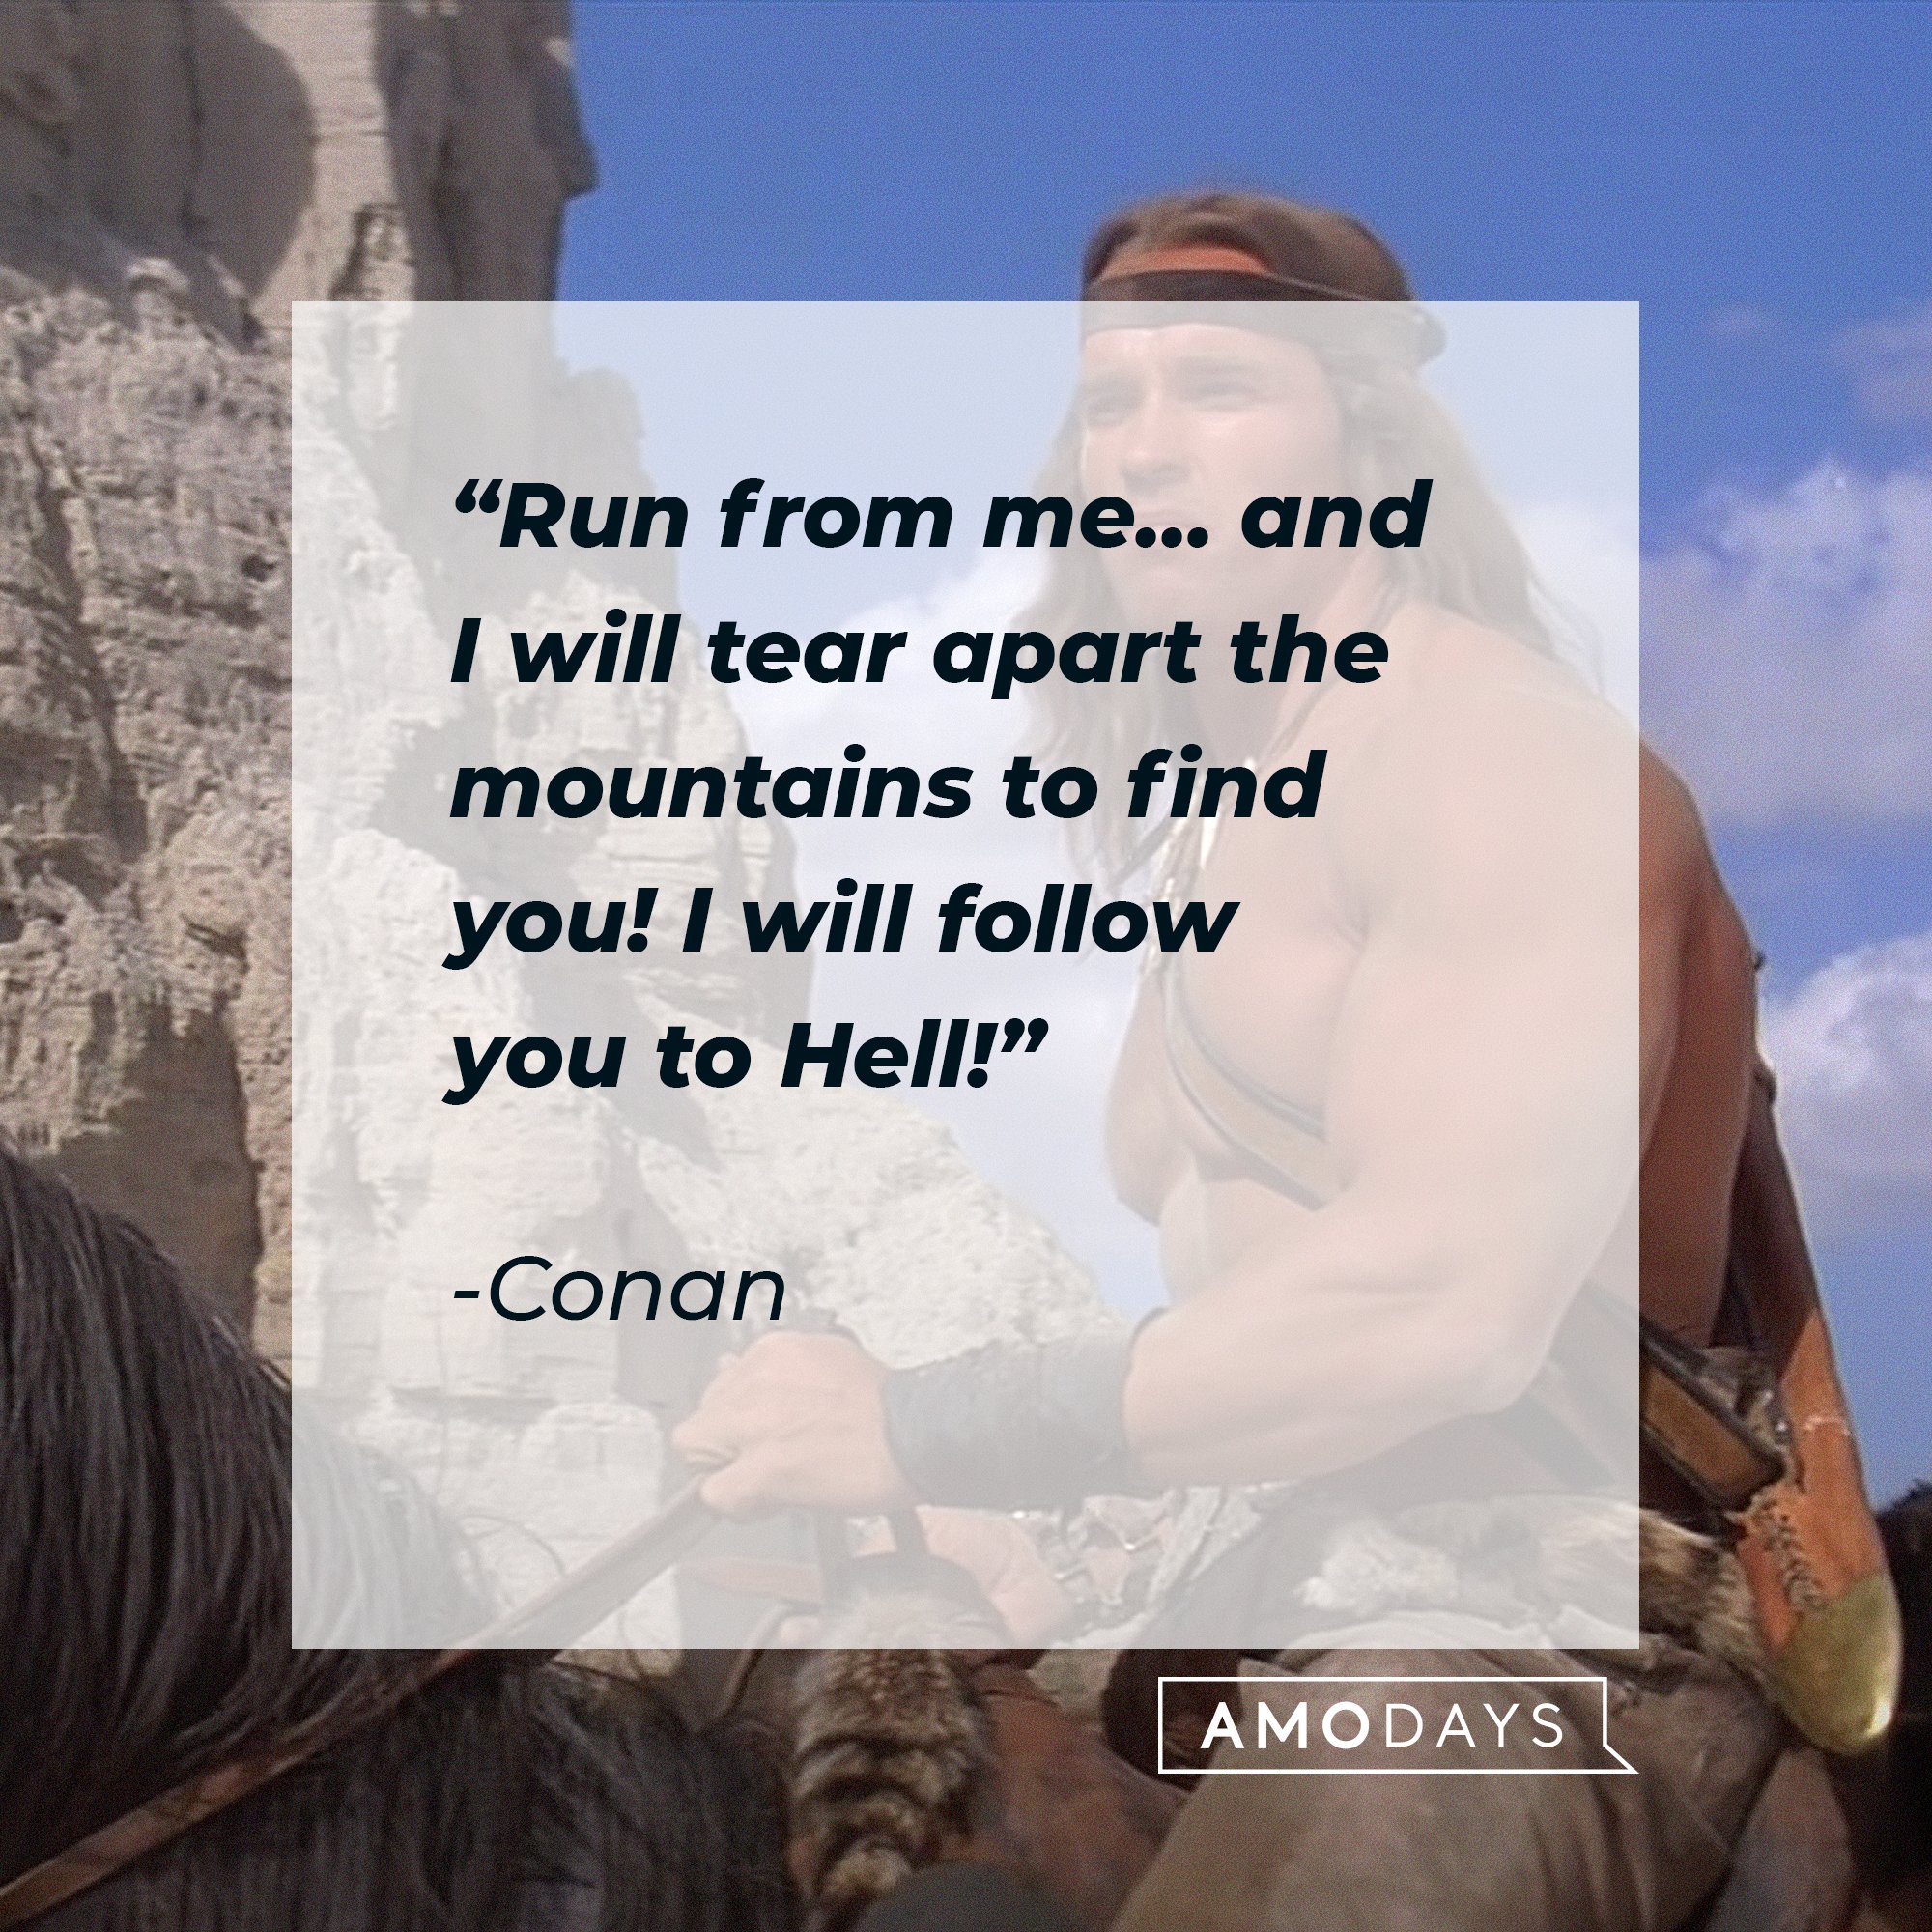 Conan's quote: “Run from me… and I will tear apart the mountains to find you! I will follow you to Hell!” | Image: AmoDays